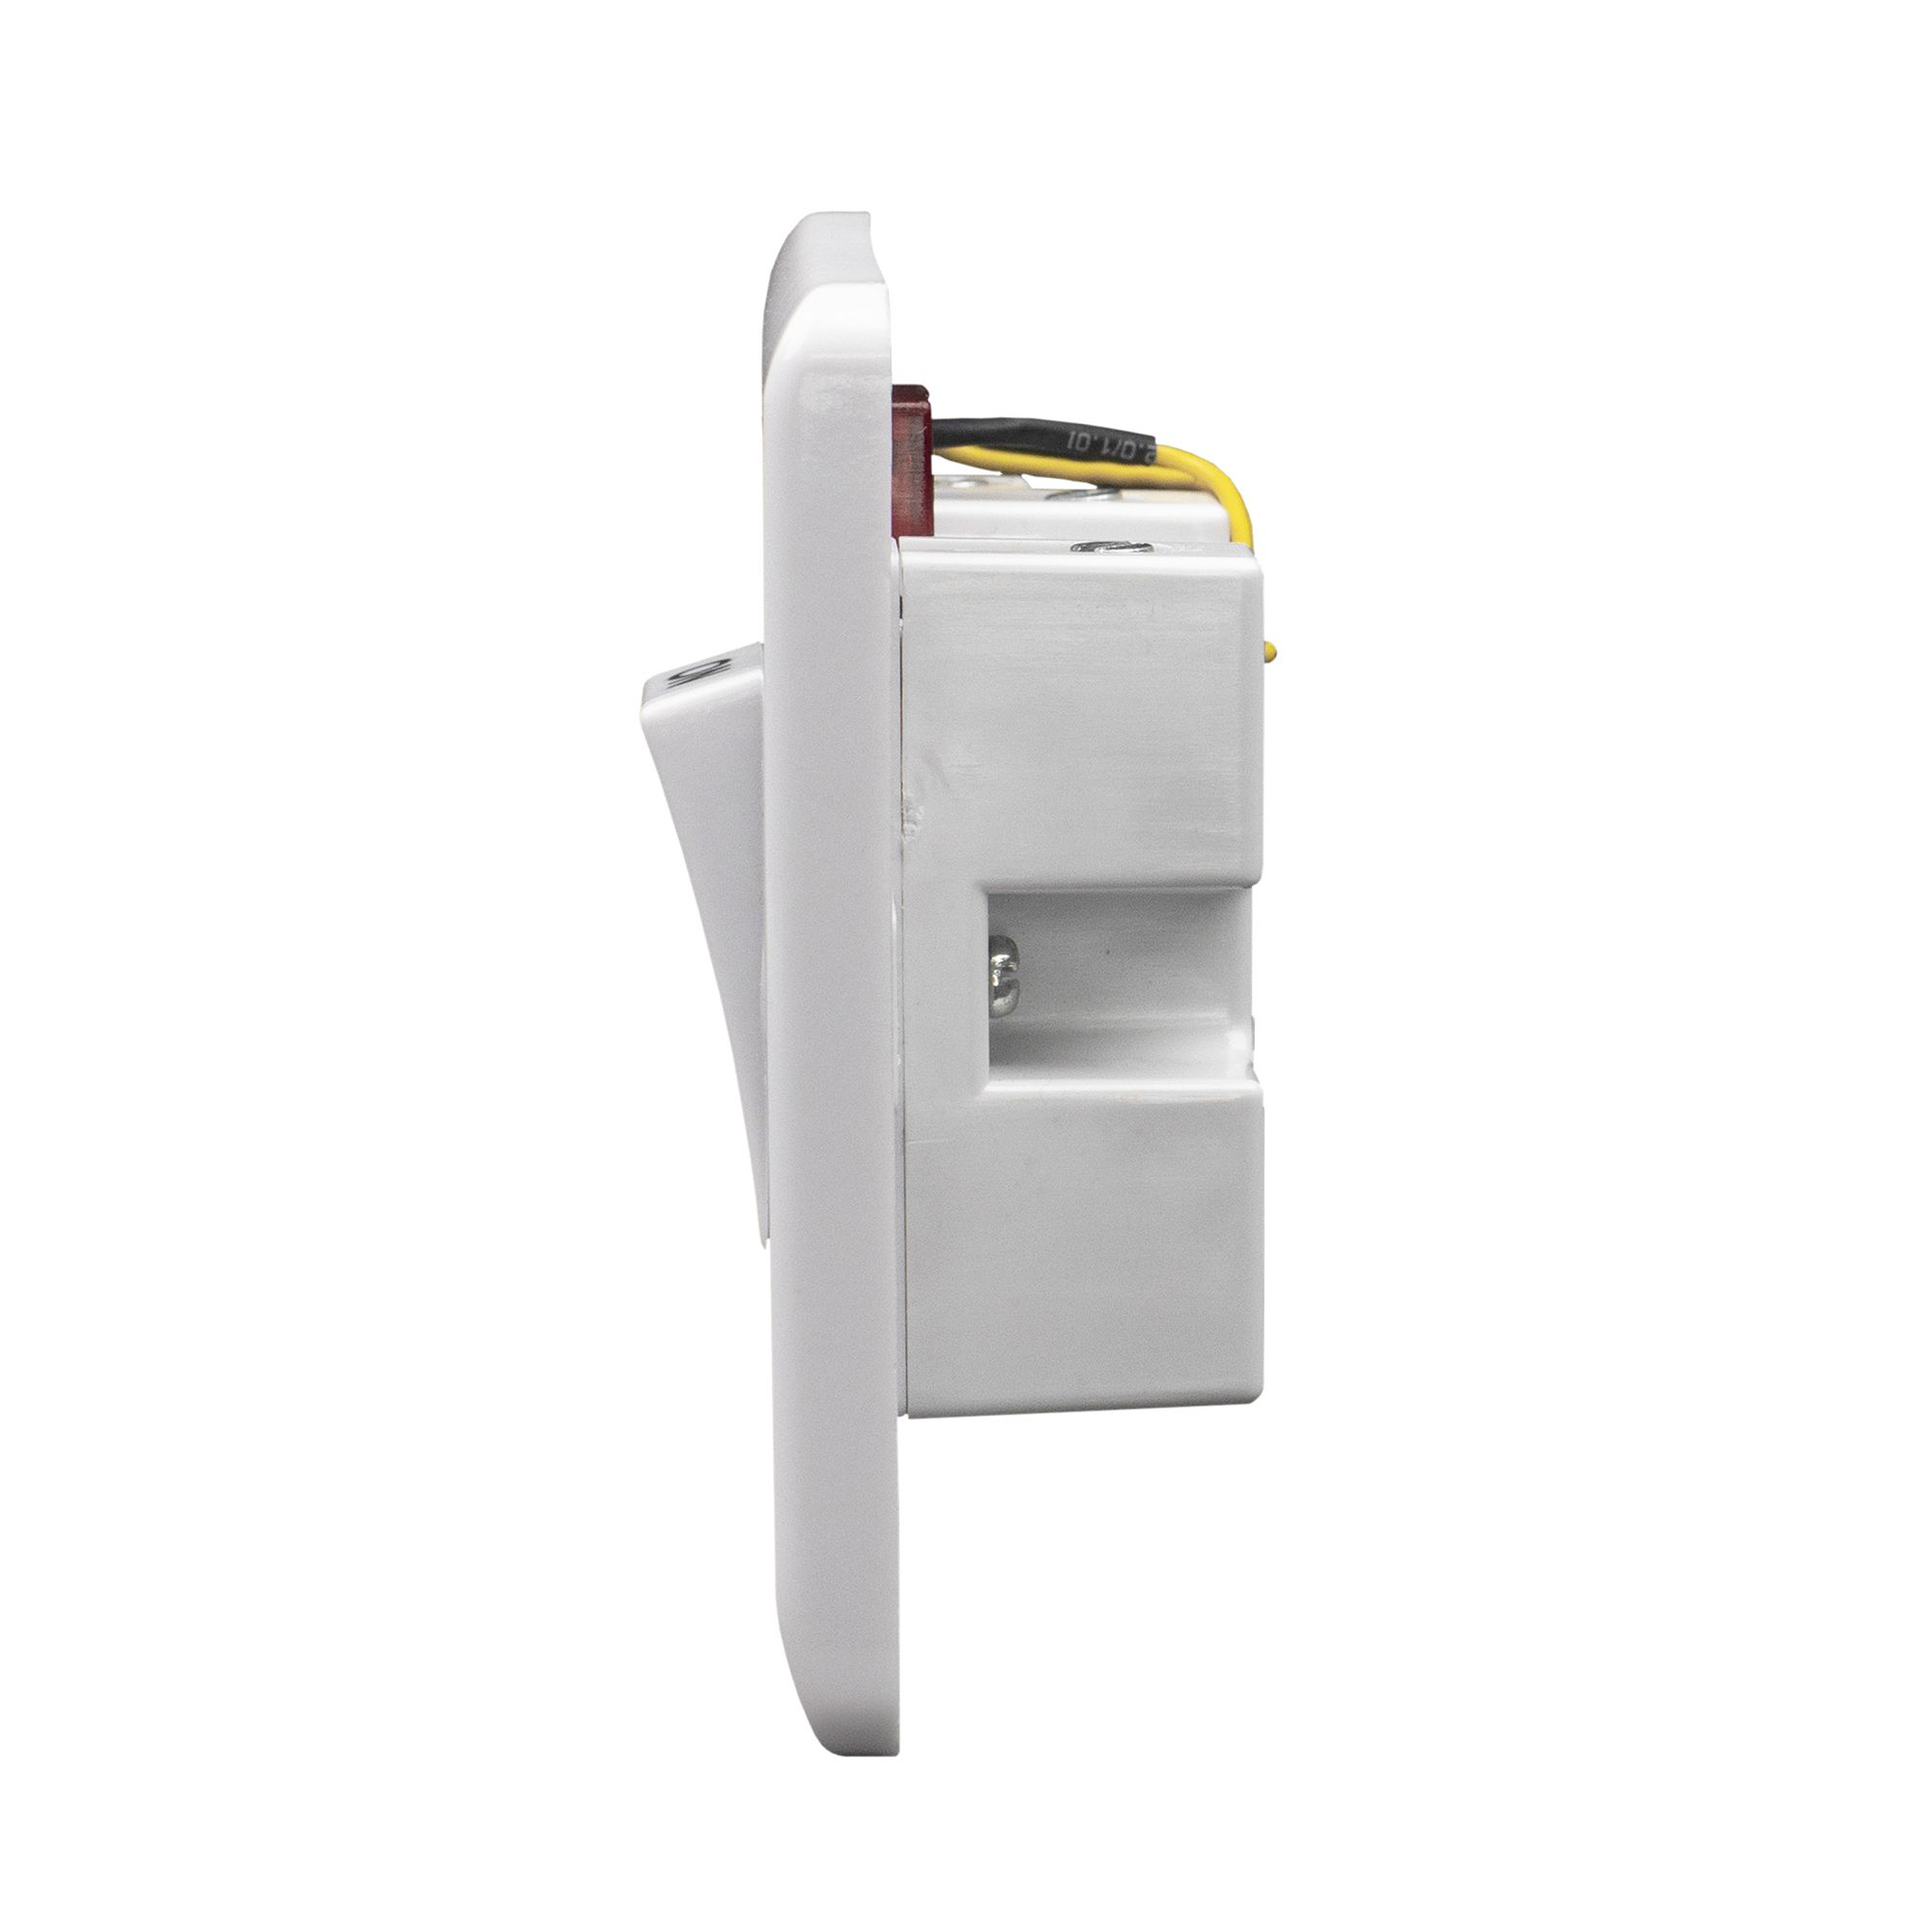 LAP 45A Rocker Raised slim Control switch with LED indicator Gloss White